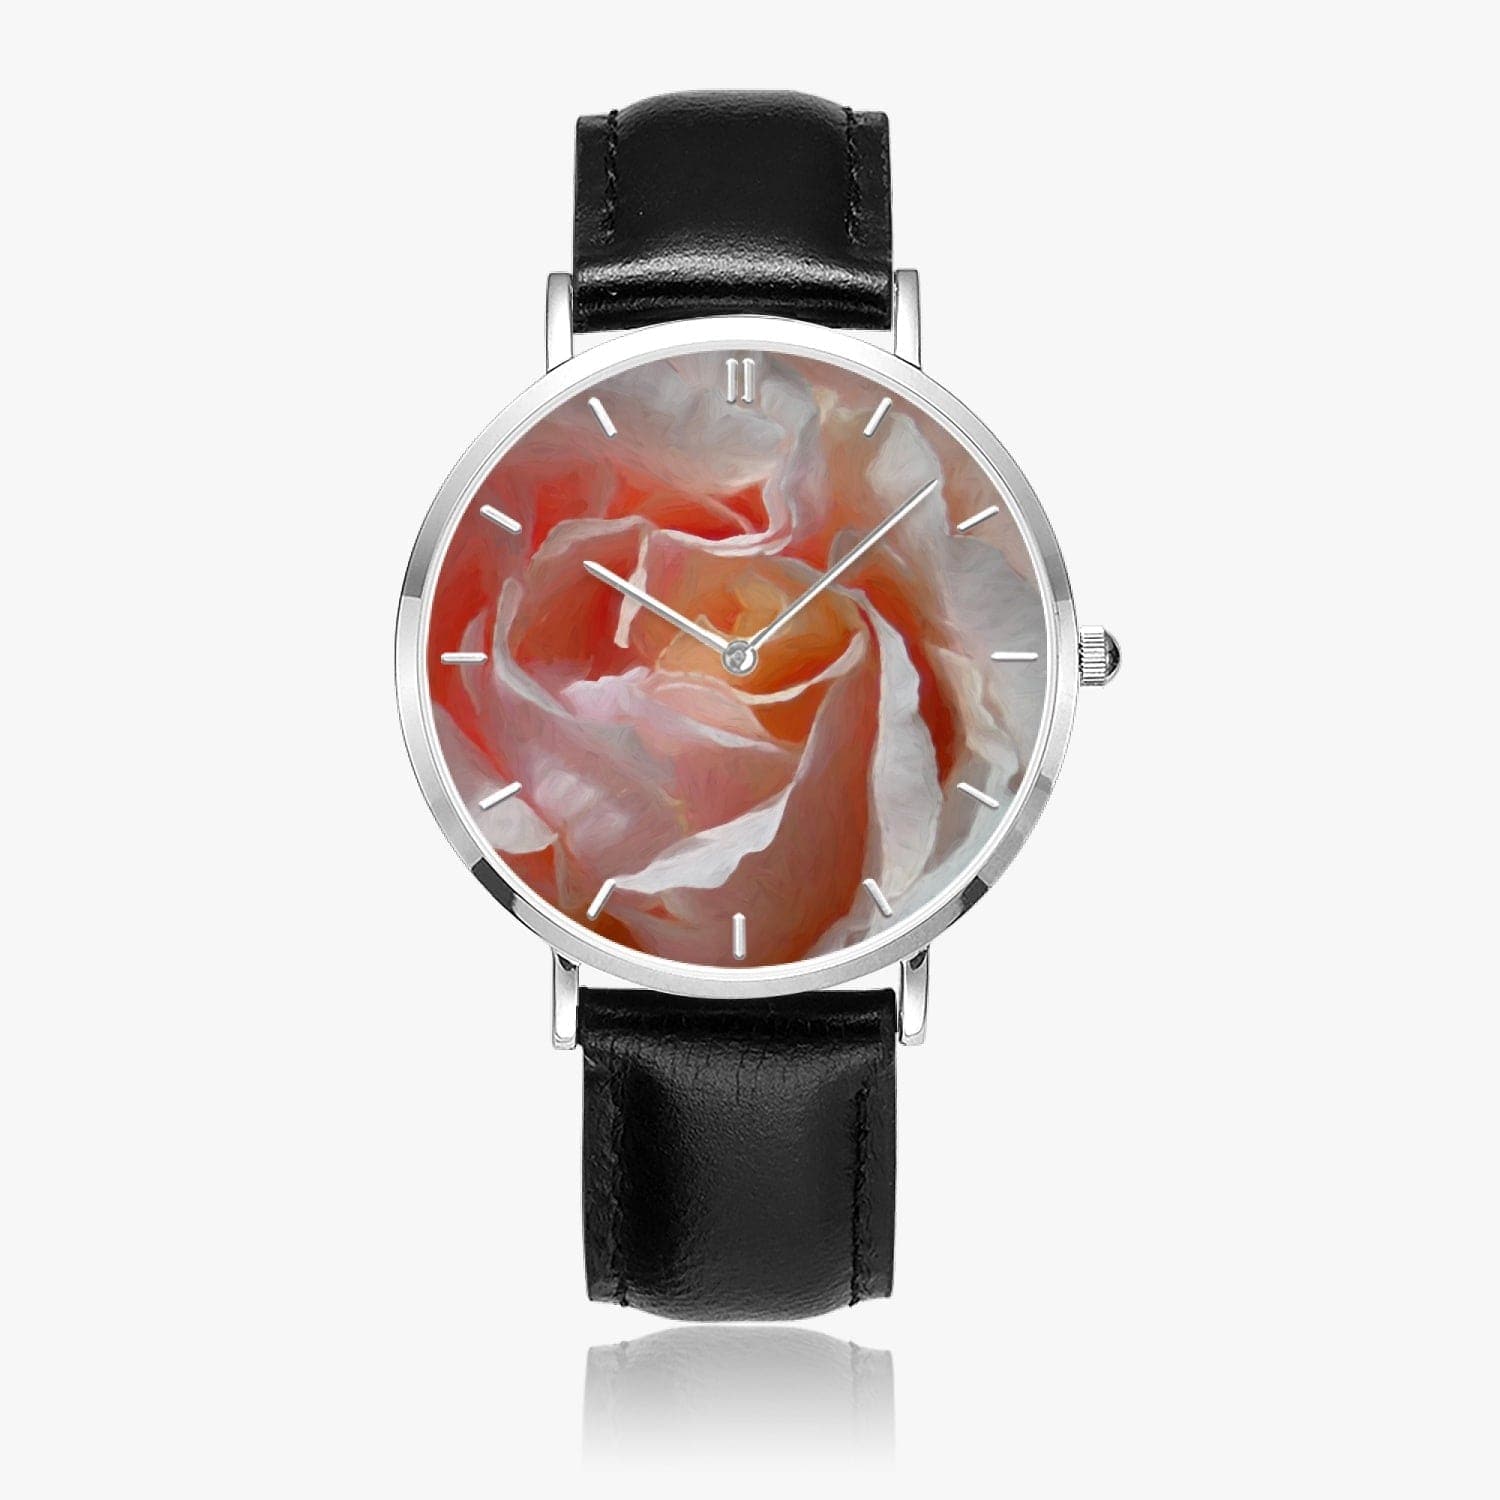 Soft rose. Hot Selling Ultra-Thin Leather Strap Quartz Watch (Silver With Indicators)designer watch by Sensus Studio